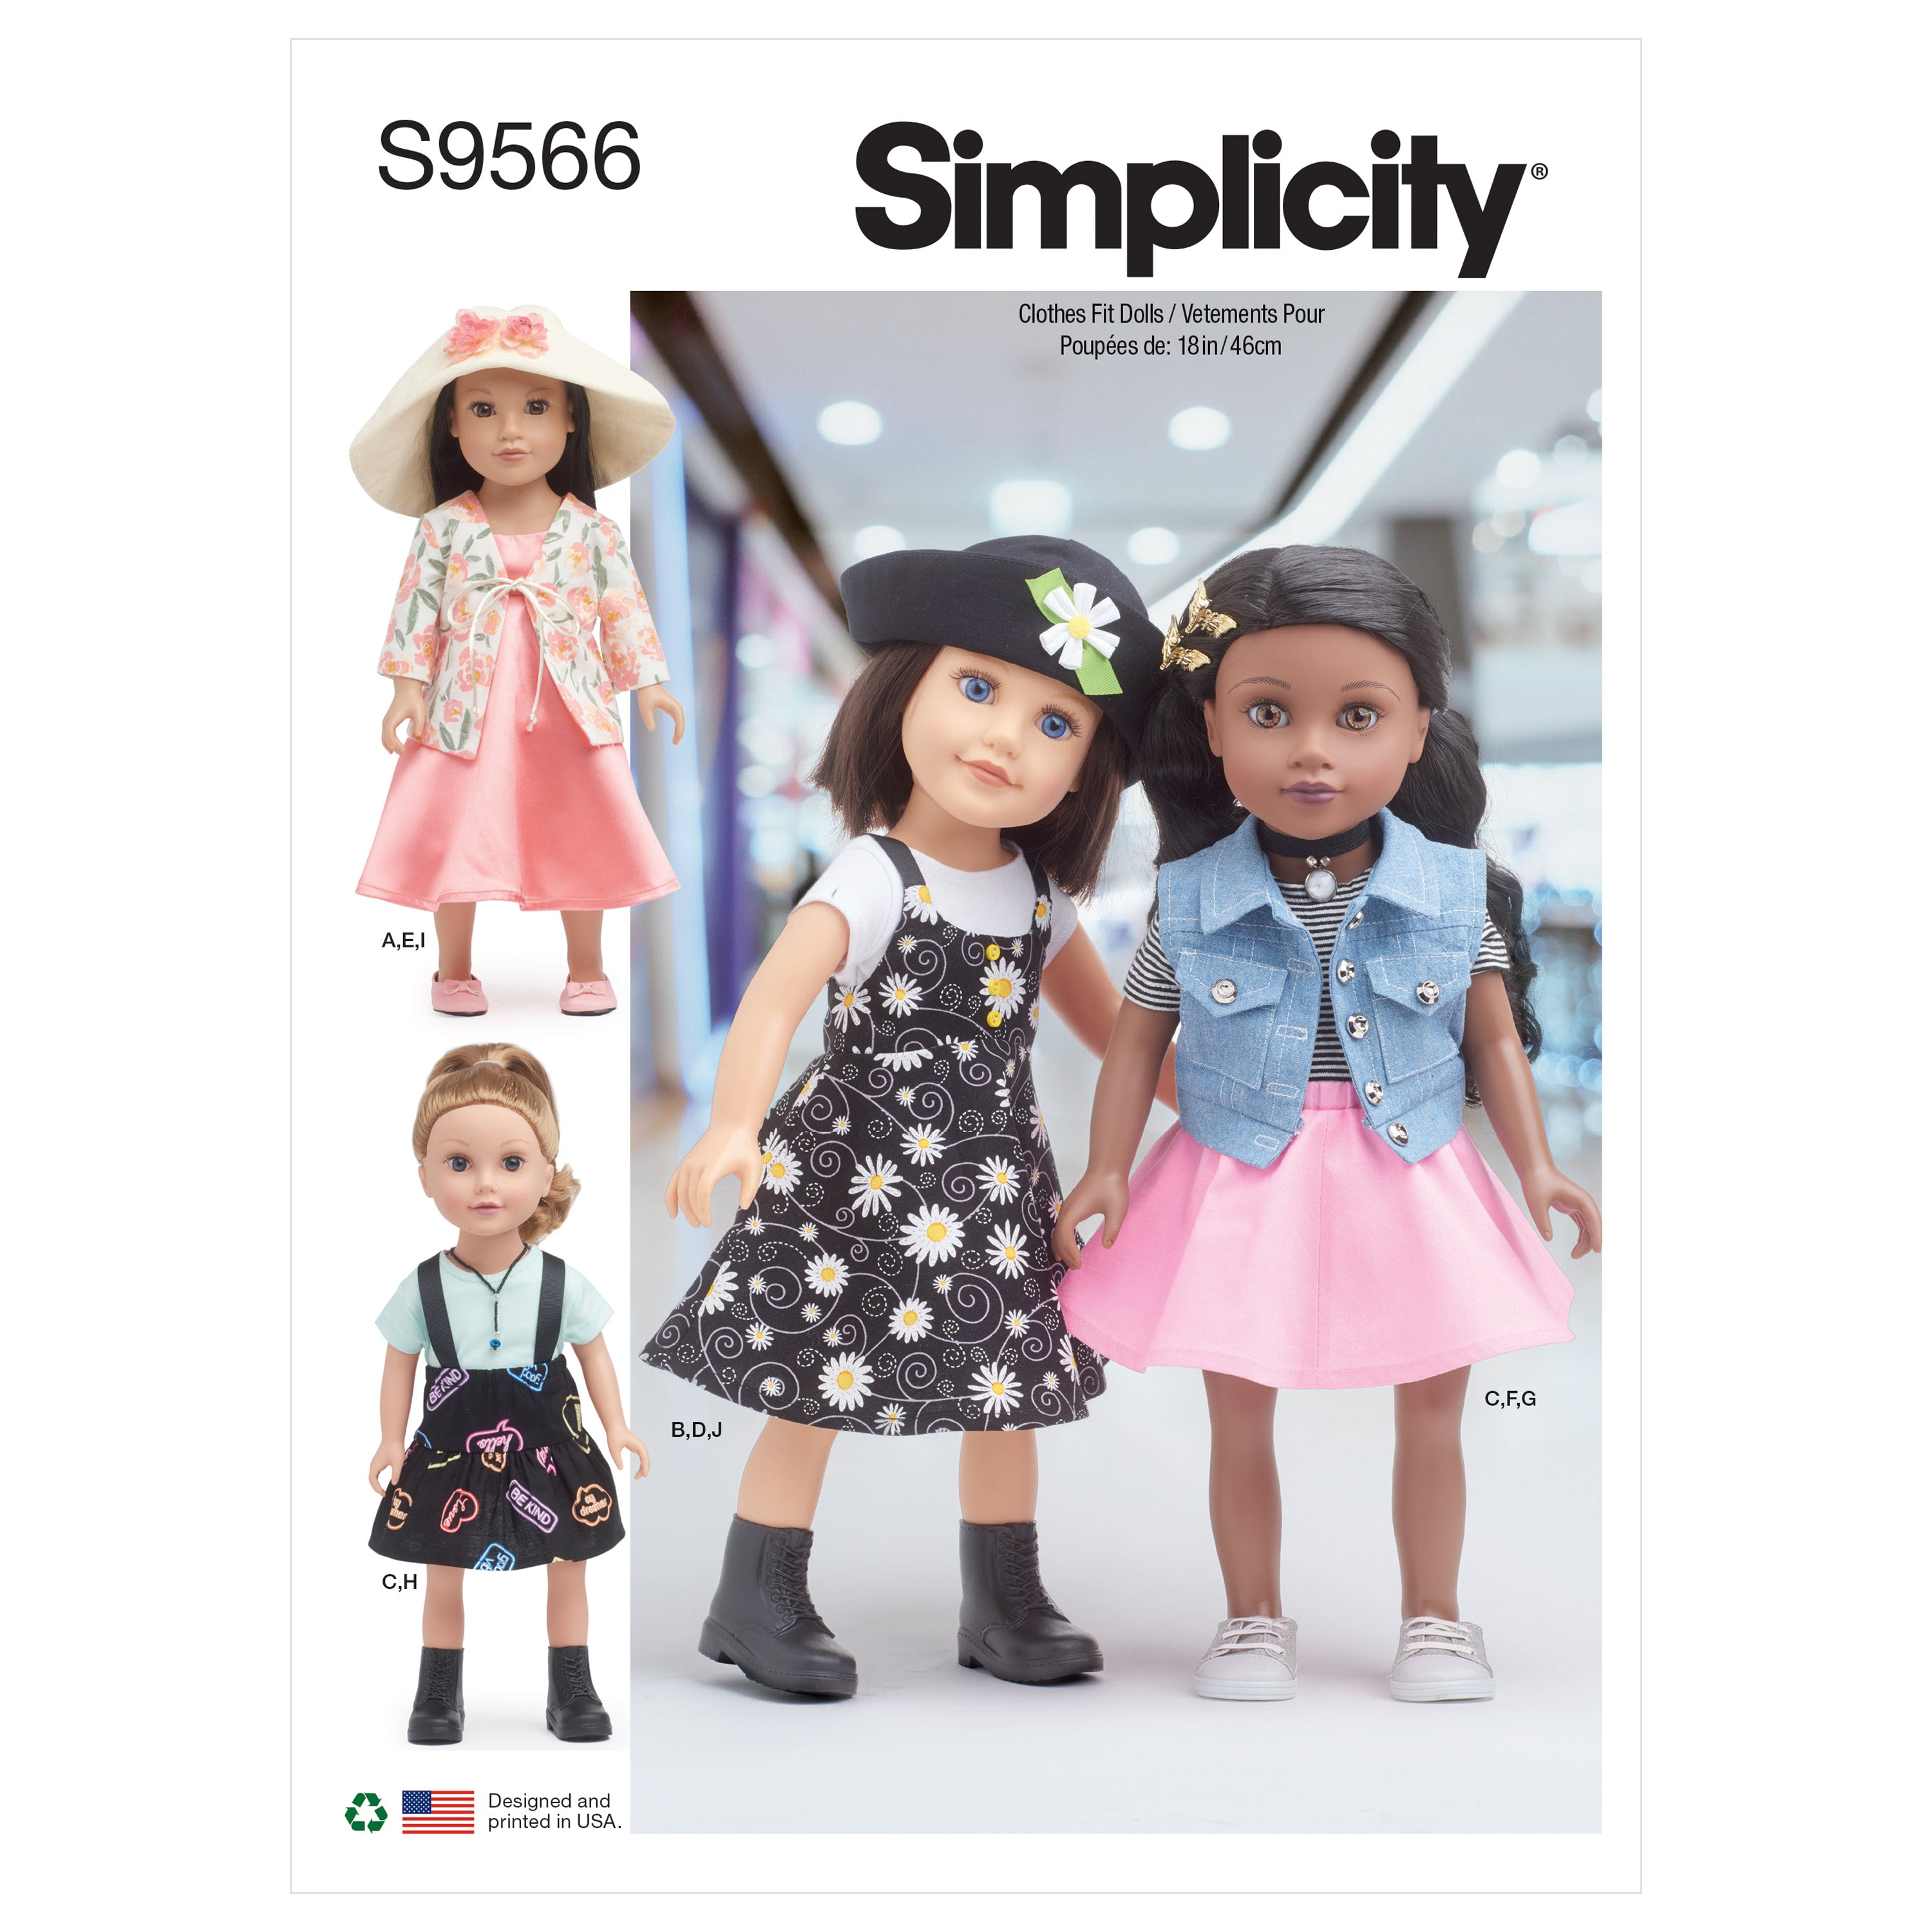 Simplicity 9566 18 inch Doll Clothes pattern from Jaycotts Sewing Supplies